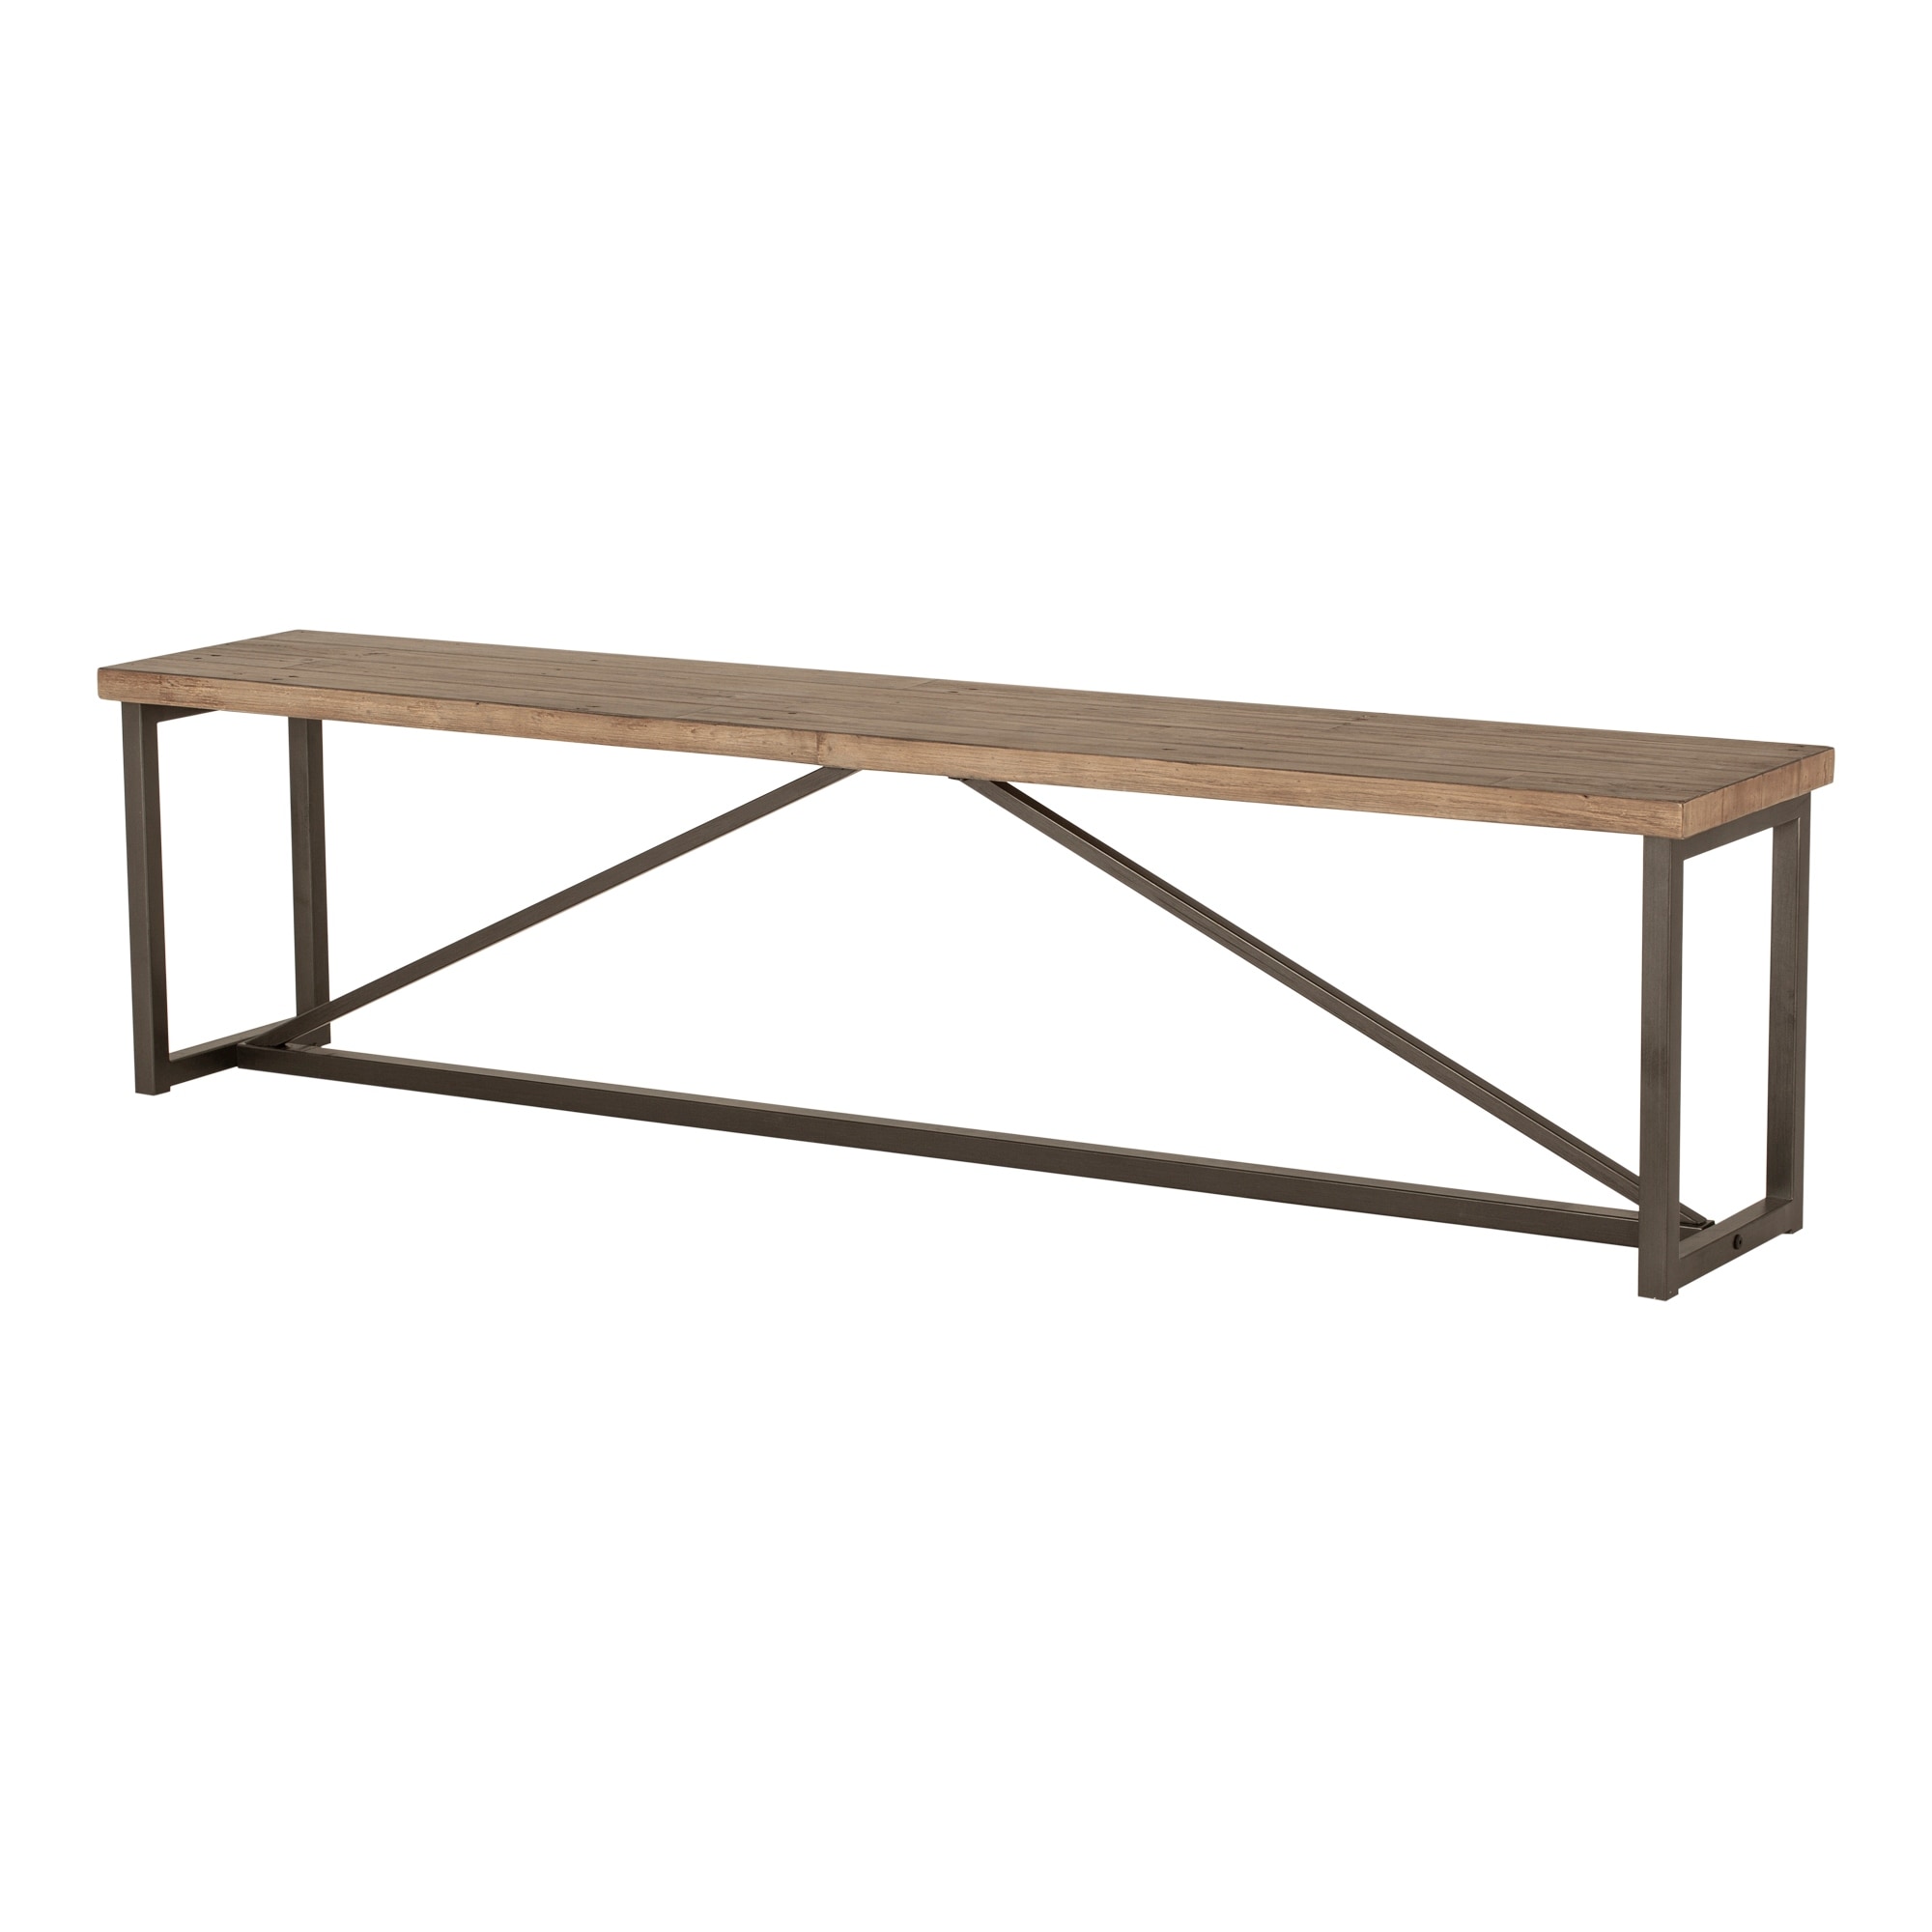 Aurelle Home Reclaimed Pine Transitional Bench - Natural